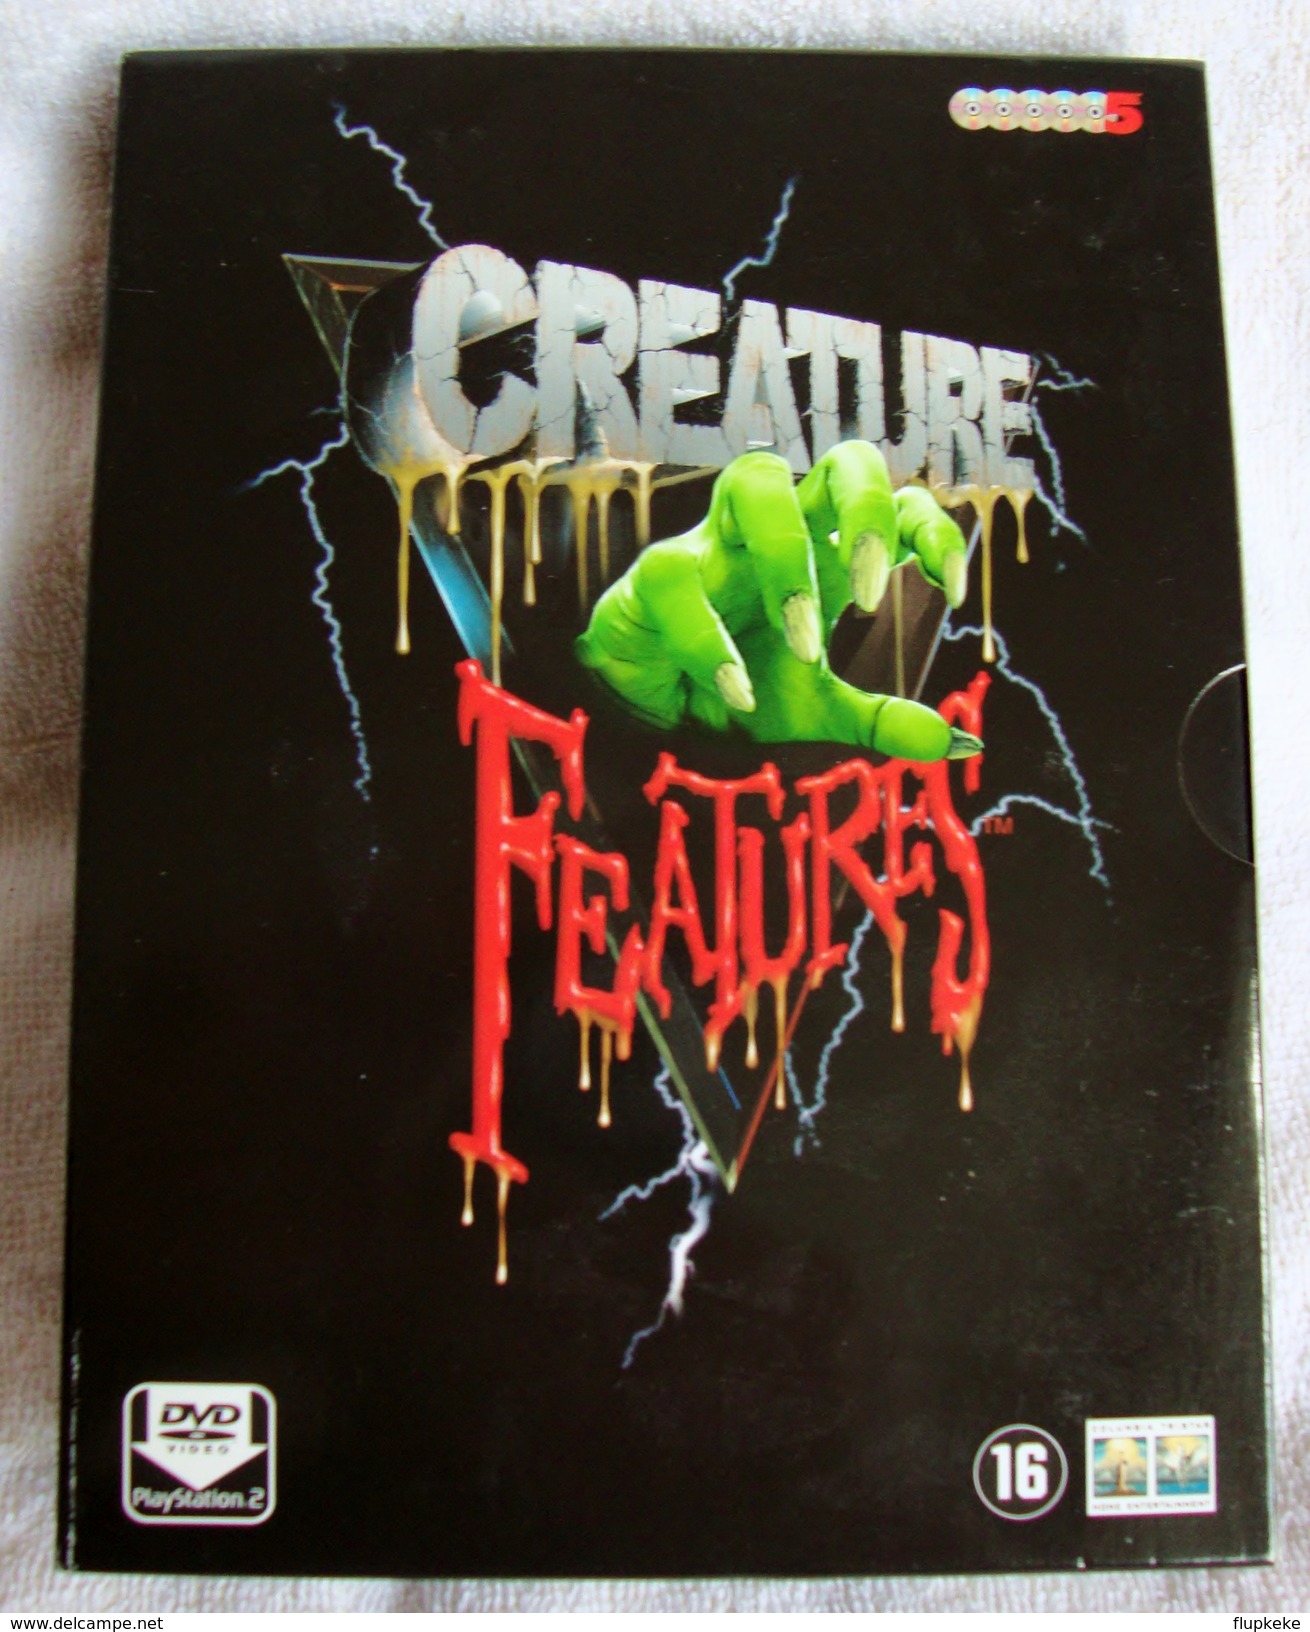 Dvd Zone 2 Creature Features She Creature The Day The World Ended Earth Vs. Spider Teenage Caveman How To Make A Monster - Sci-Fi, Fantasy